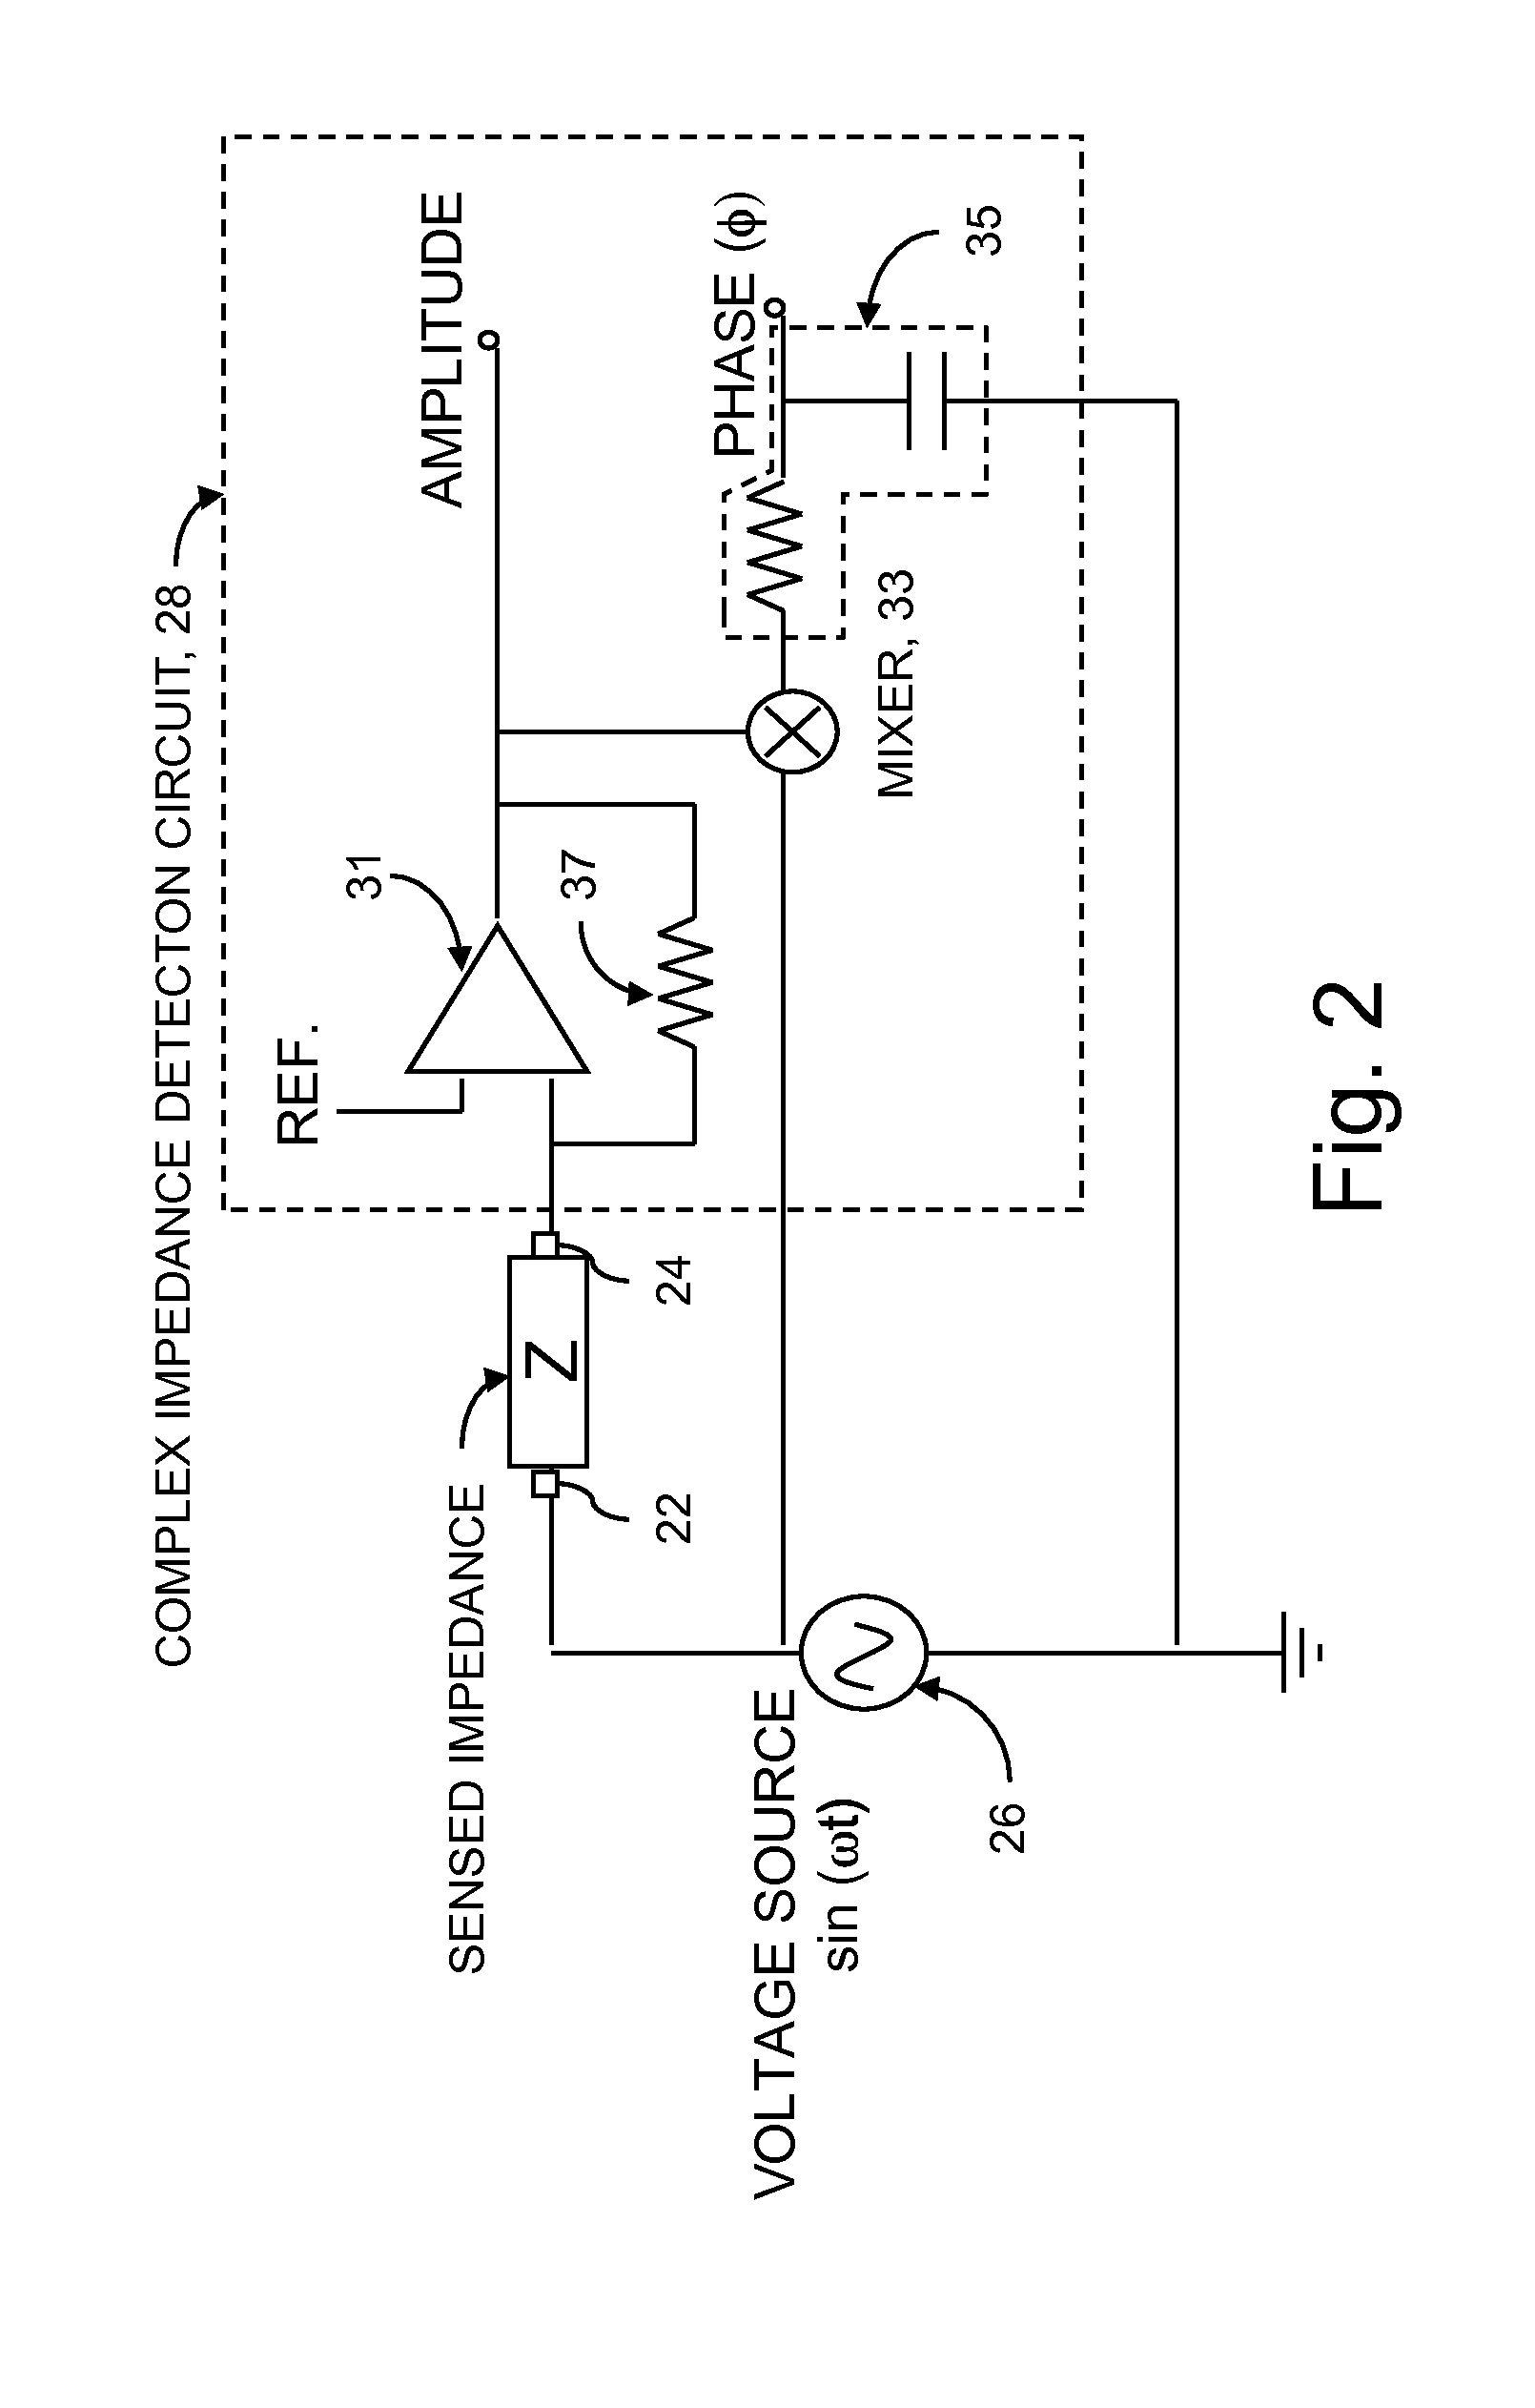 Surface impedance systems and methods